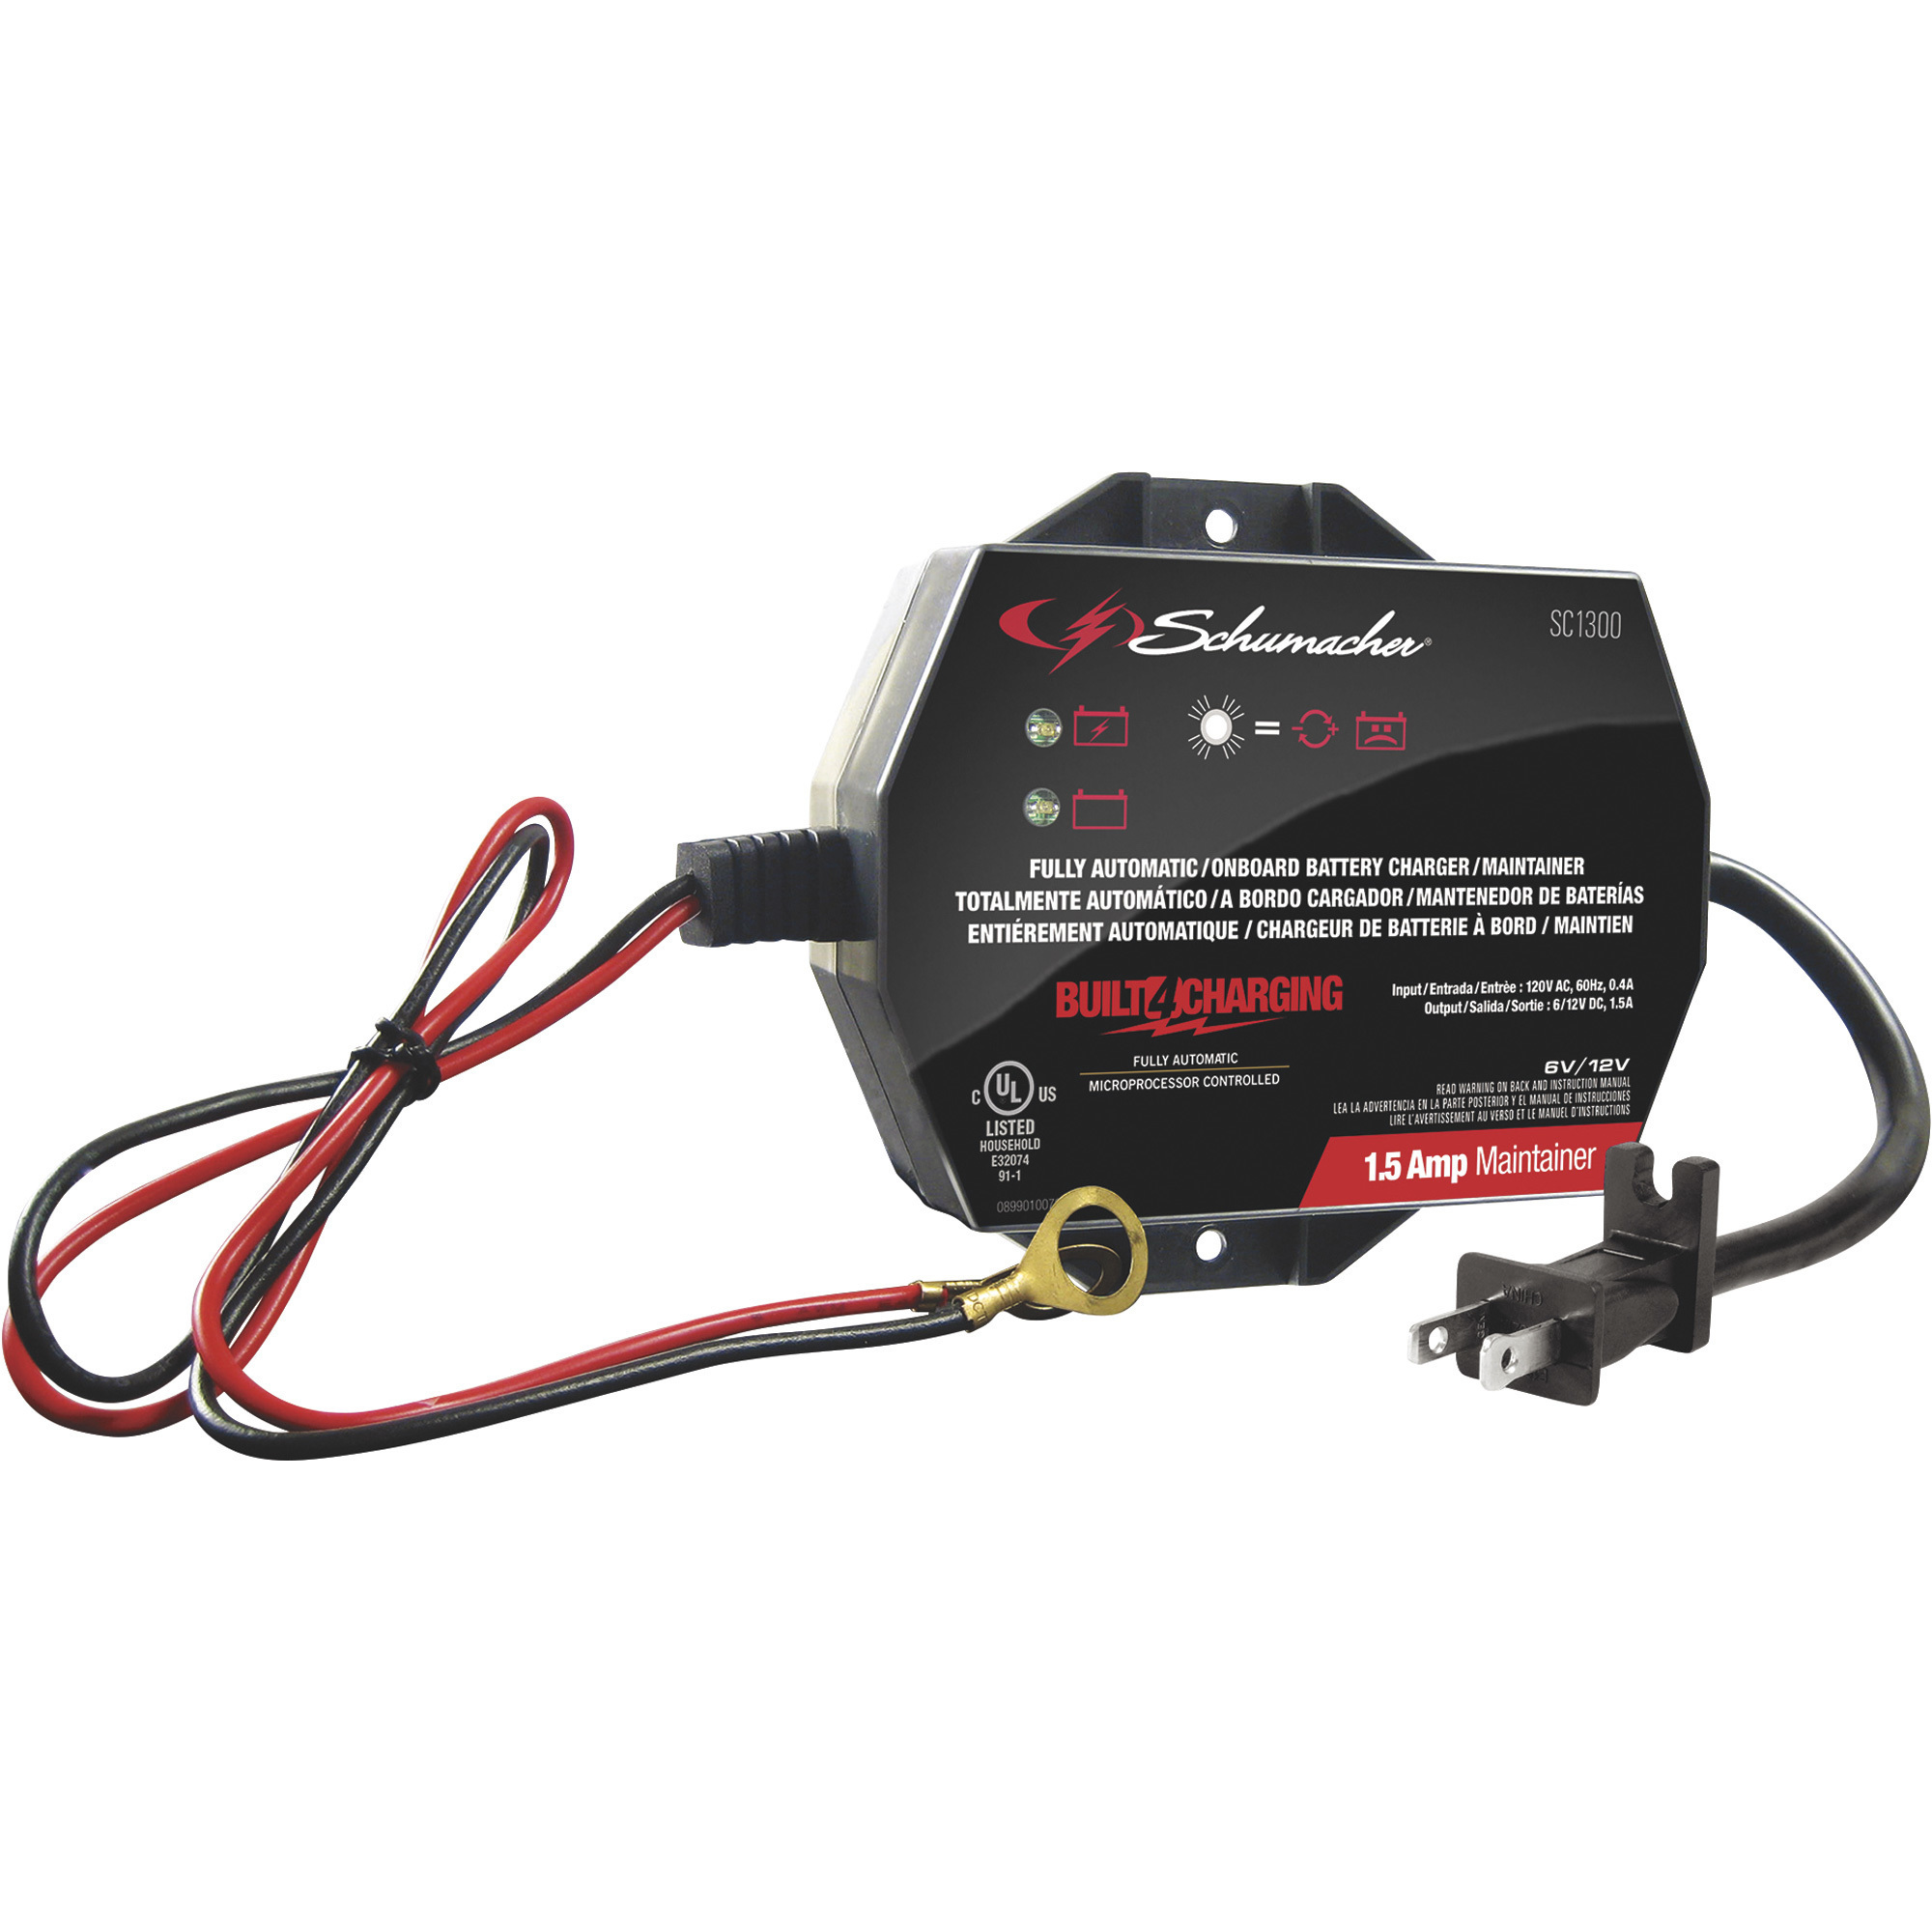 Schumacher On-Board Battery Charger/Trickle Charger â 6/12 Volt, 1.5 Amp, Model SC1300